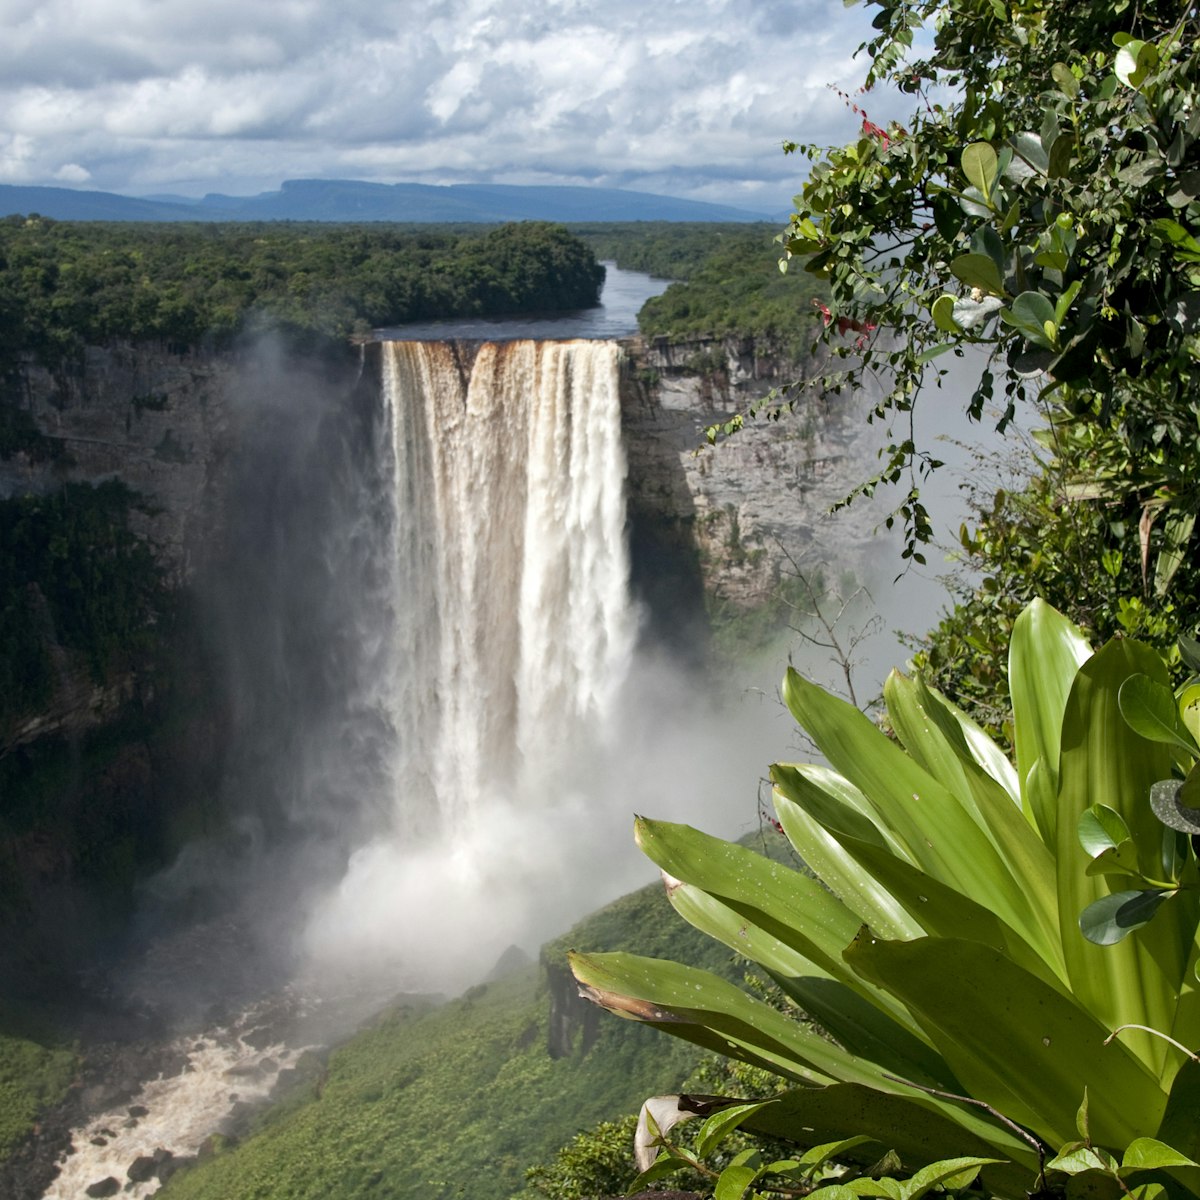 Giant Tank Bromeliad (Brocchinia micrantha) with Kaieteur Falls in the background, Kaieteur National Park, Guyana, South America